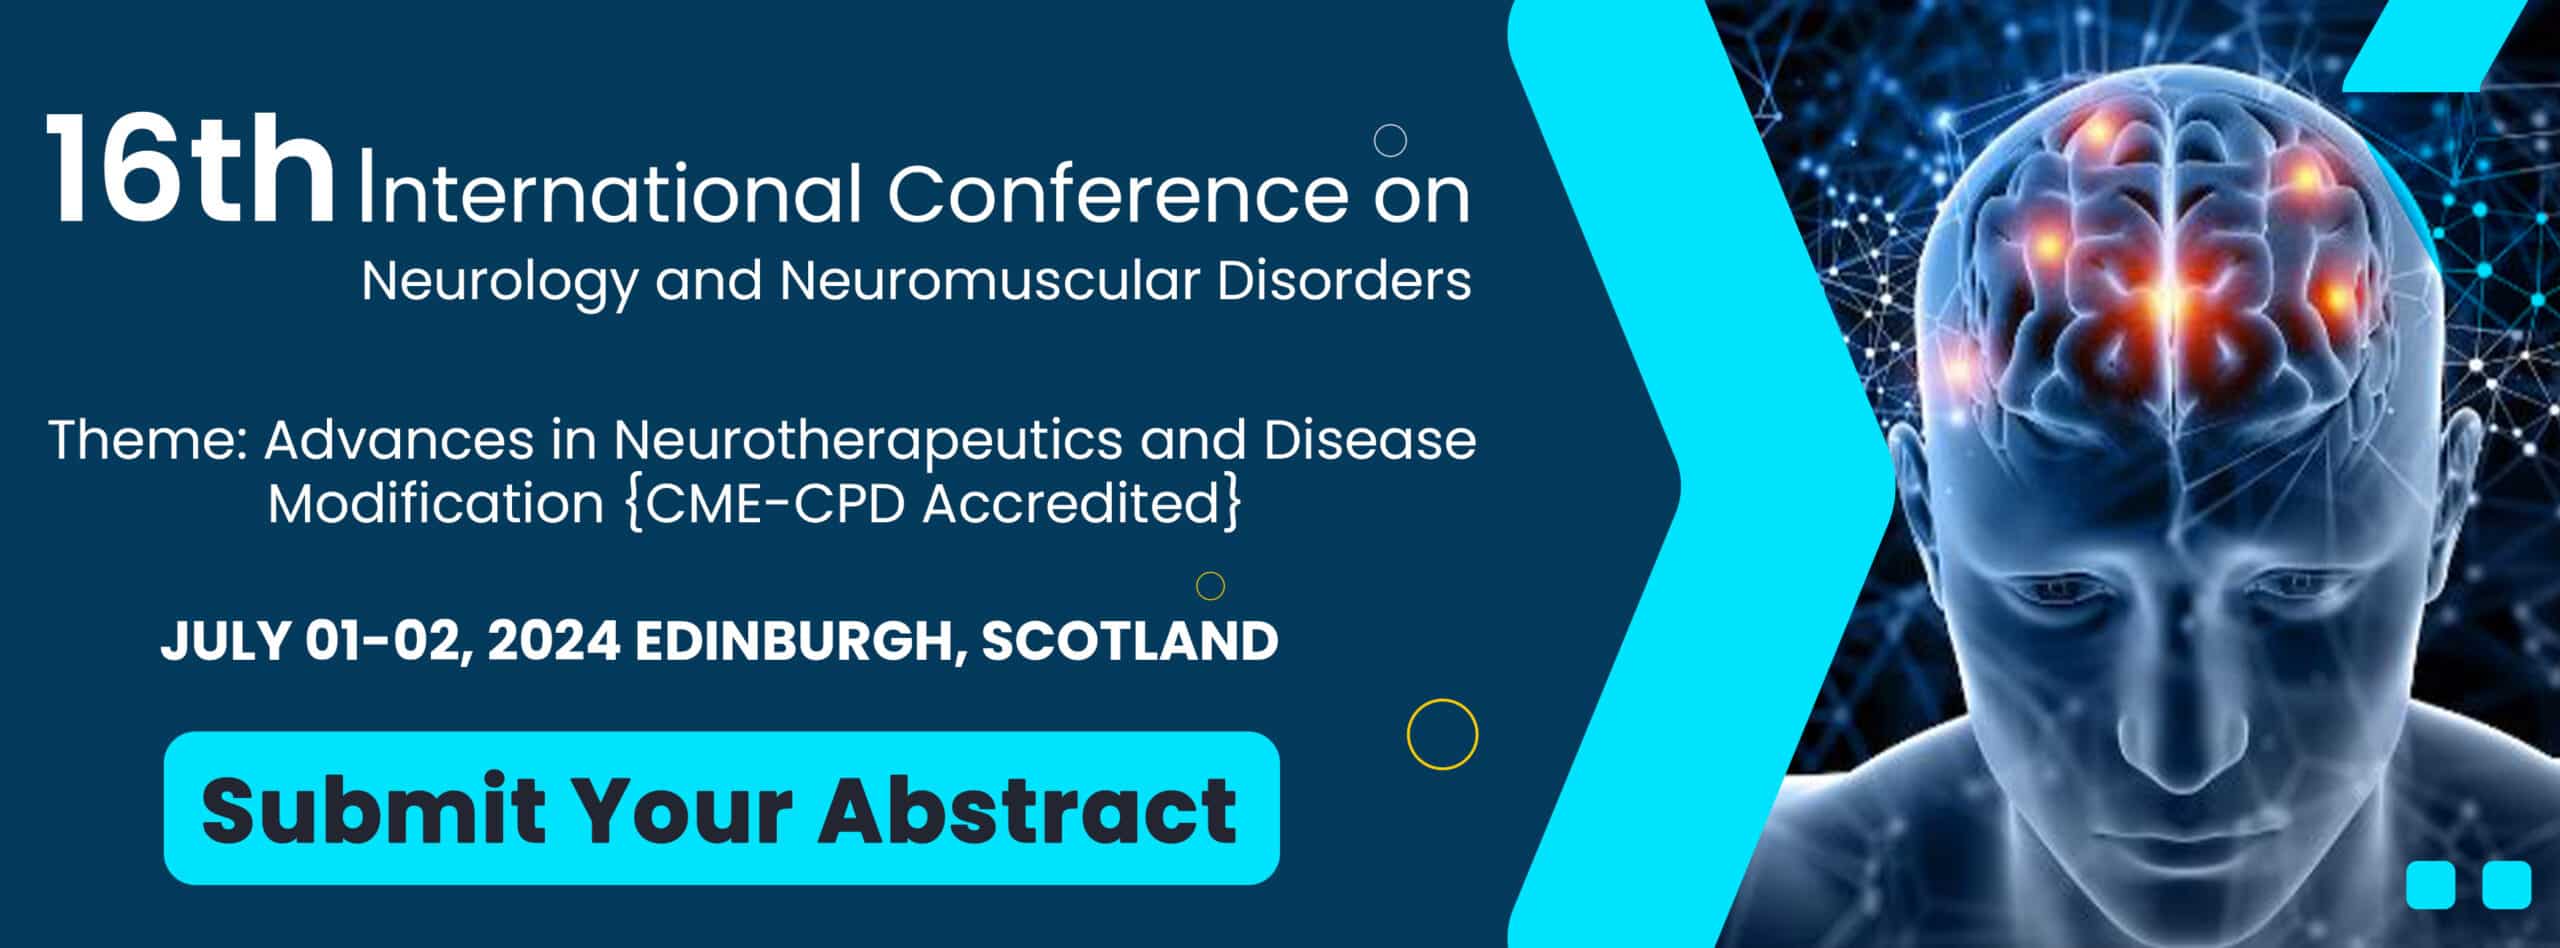 16th International Conference on  Neurology and Neuromuscular